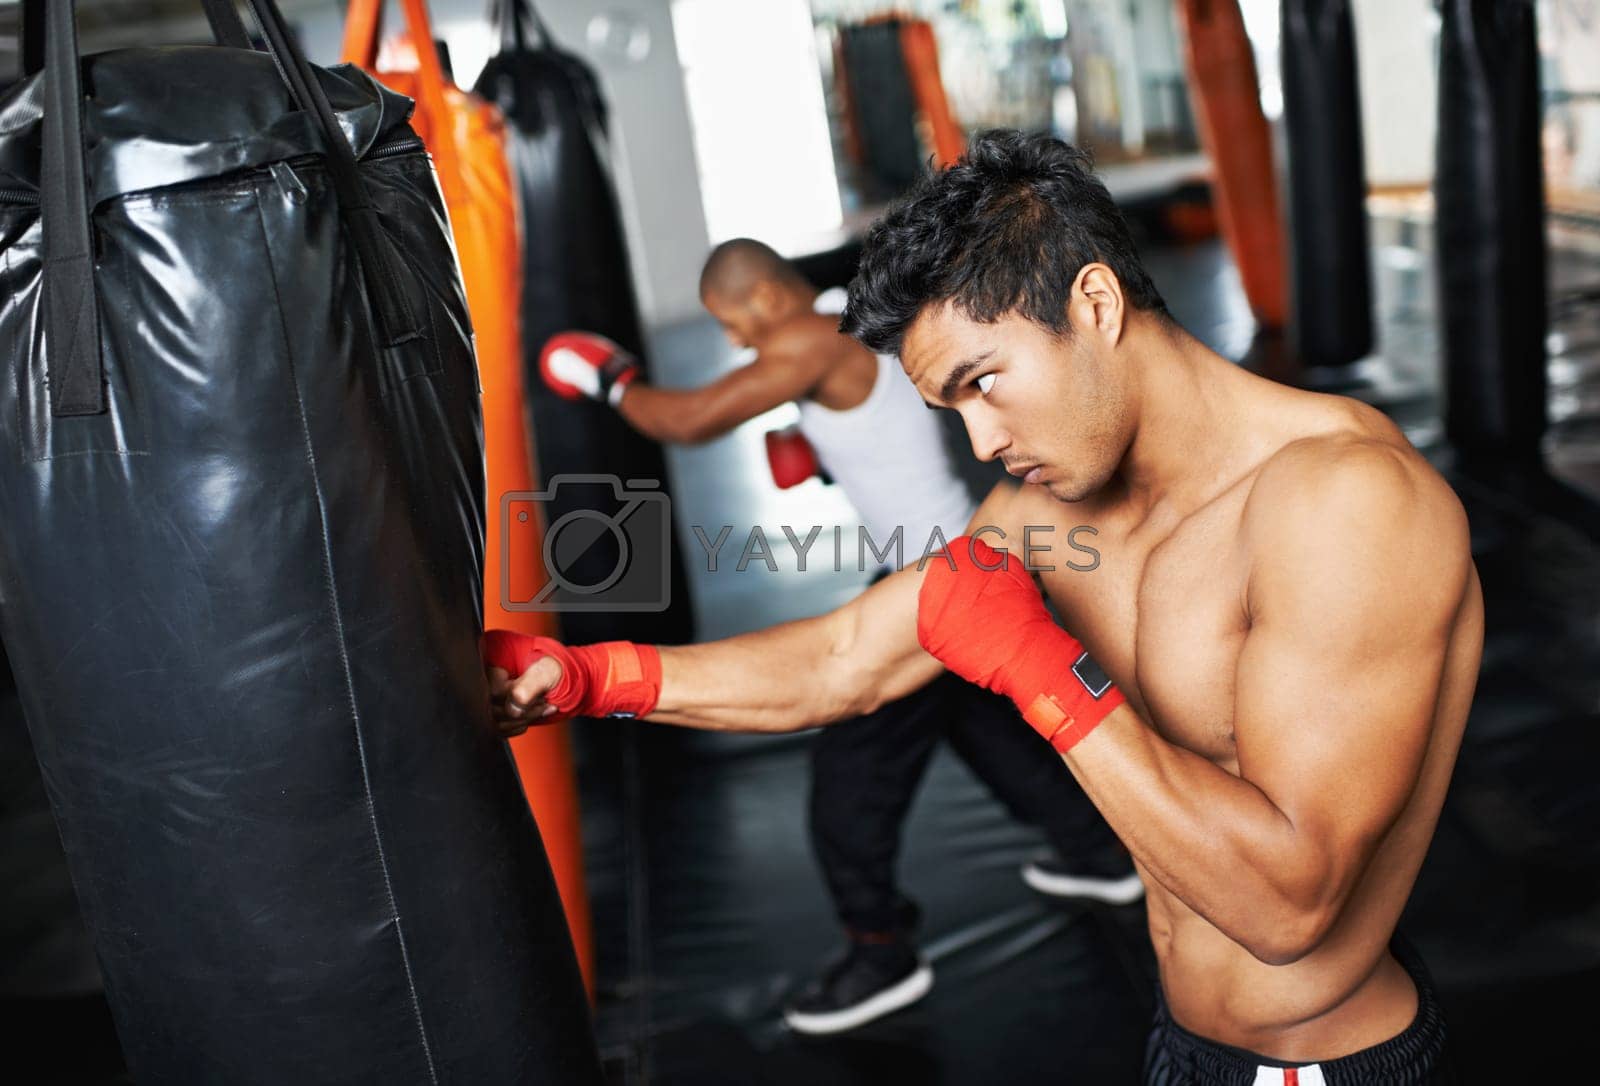 Royalty free image of Hes dedicated to the sport of boxing. young male boxers training on heavy bags. by YuriArcurs